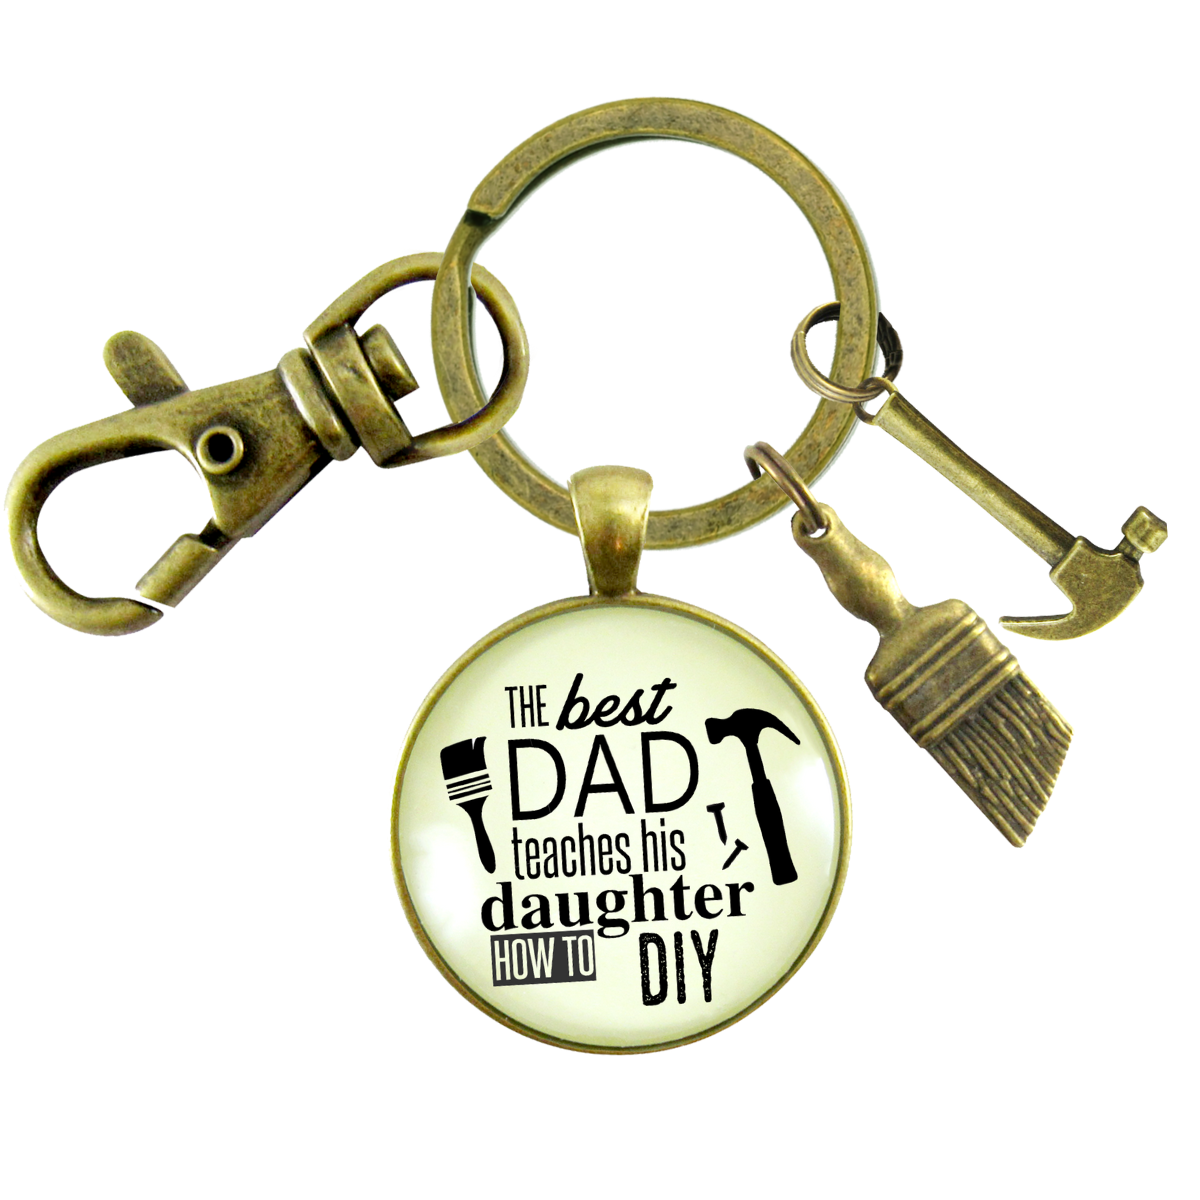 Best Dad Teaches His Daughter How To DIY Keychain Fixer Upper Mens Key Ring Tool Hammer Charm - Gutsy Goodness Handmade Jewelry;Best Dad Teaches His Daughter How To Diy Keychain Fixer Upper Mens Key Ring Tool Hammer Charm - Gutsy Goodness Handmade Jewelry Gifts